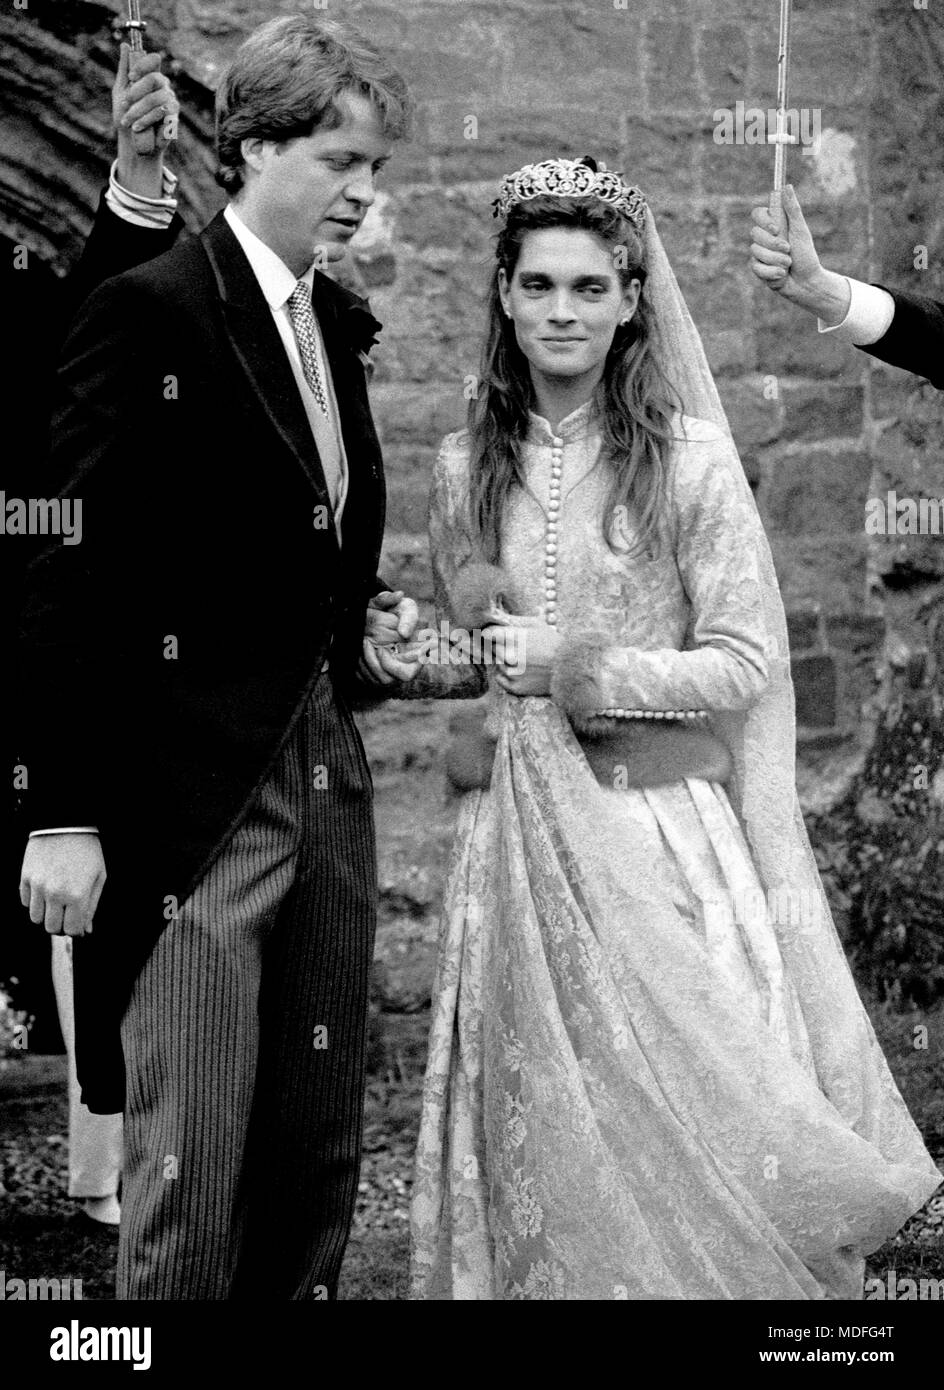 Viscount Althorp alongside his bride Victoria Lockwood after their wedding ceremony at St. Mary's Church in Great Brington, Northamptonshire. Stock Photo